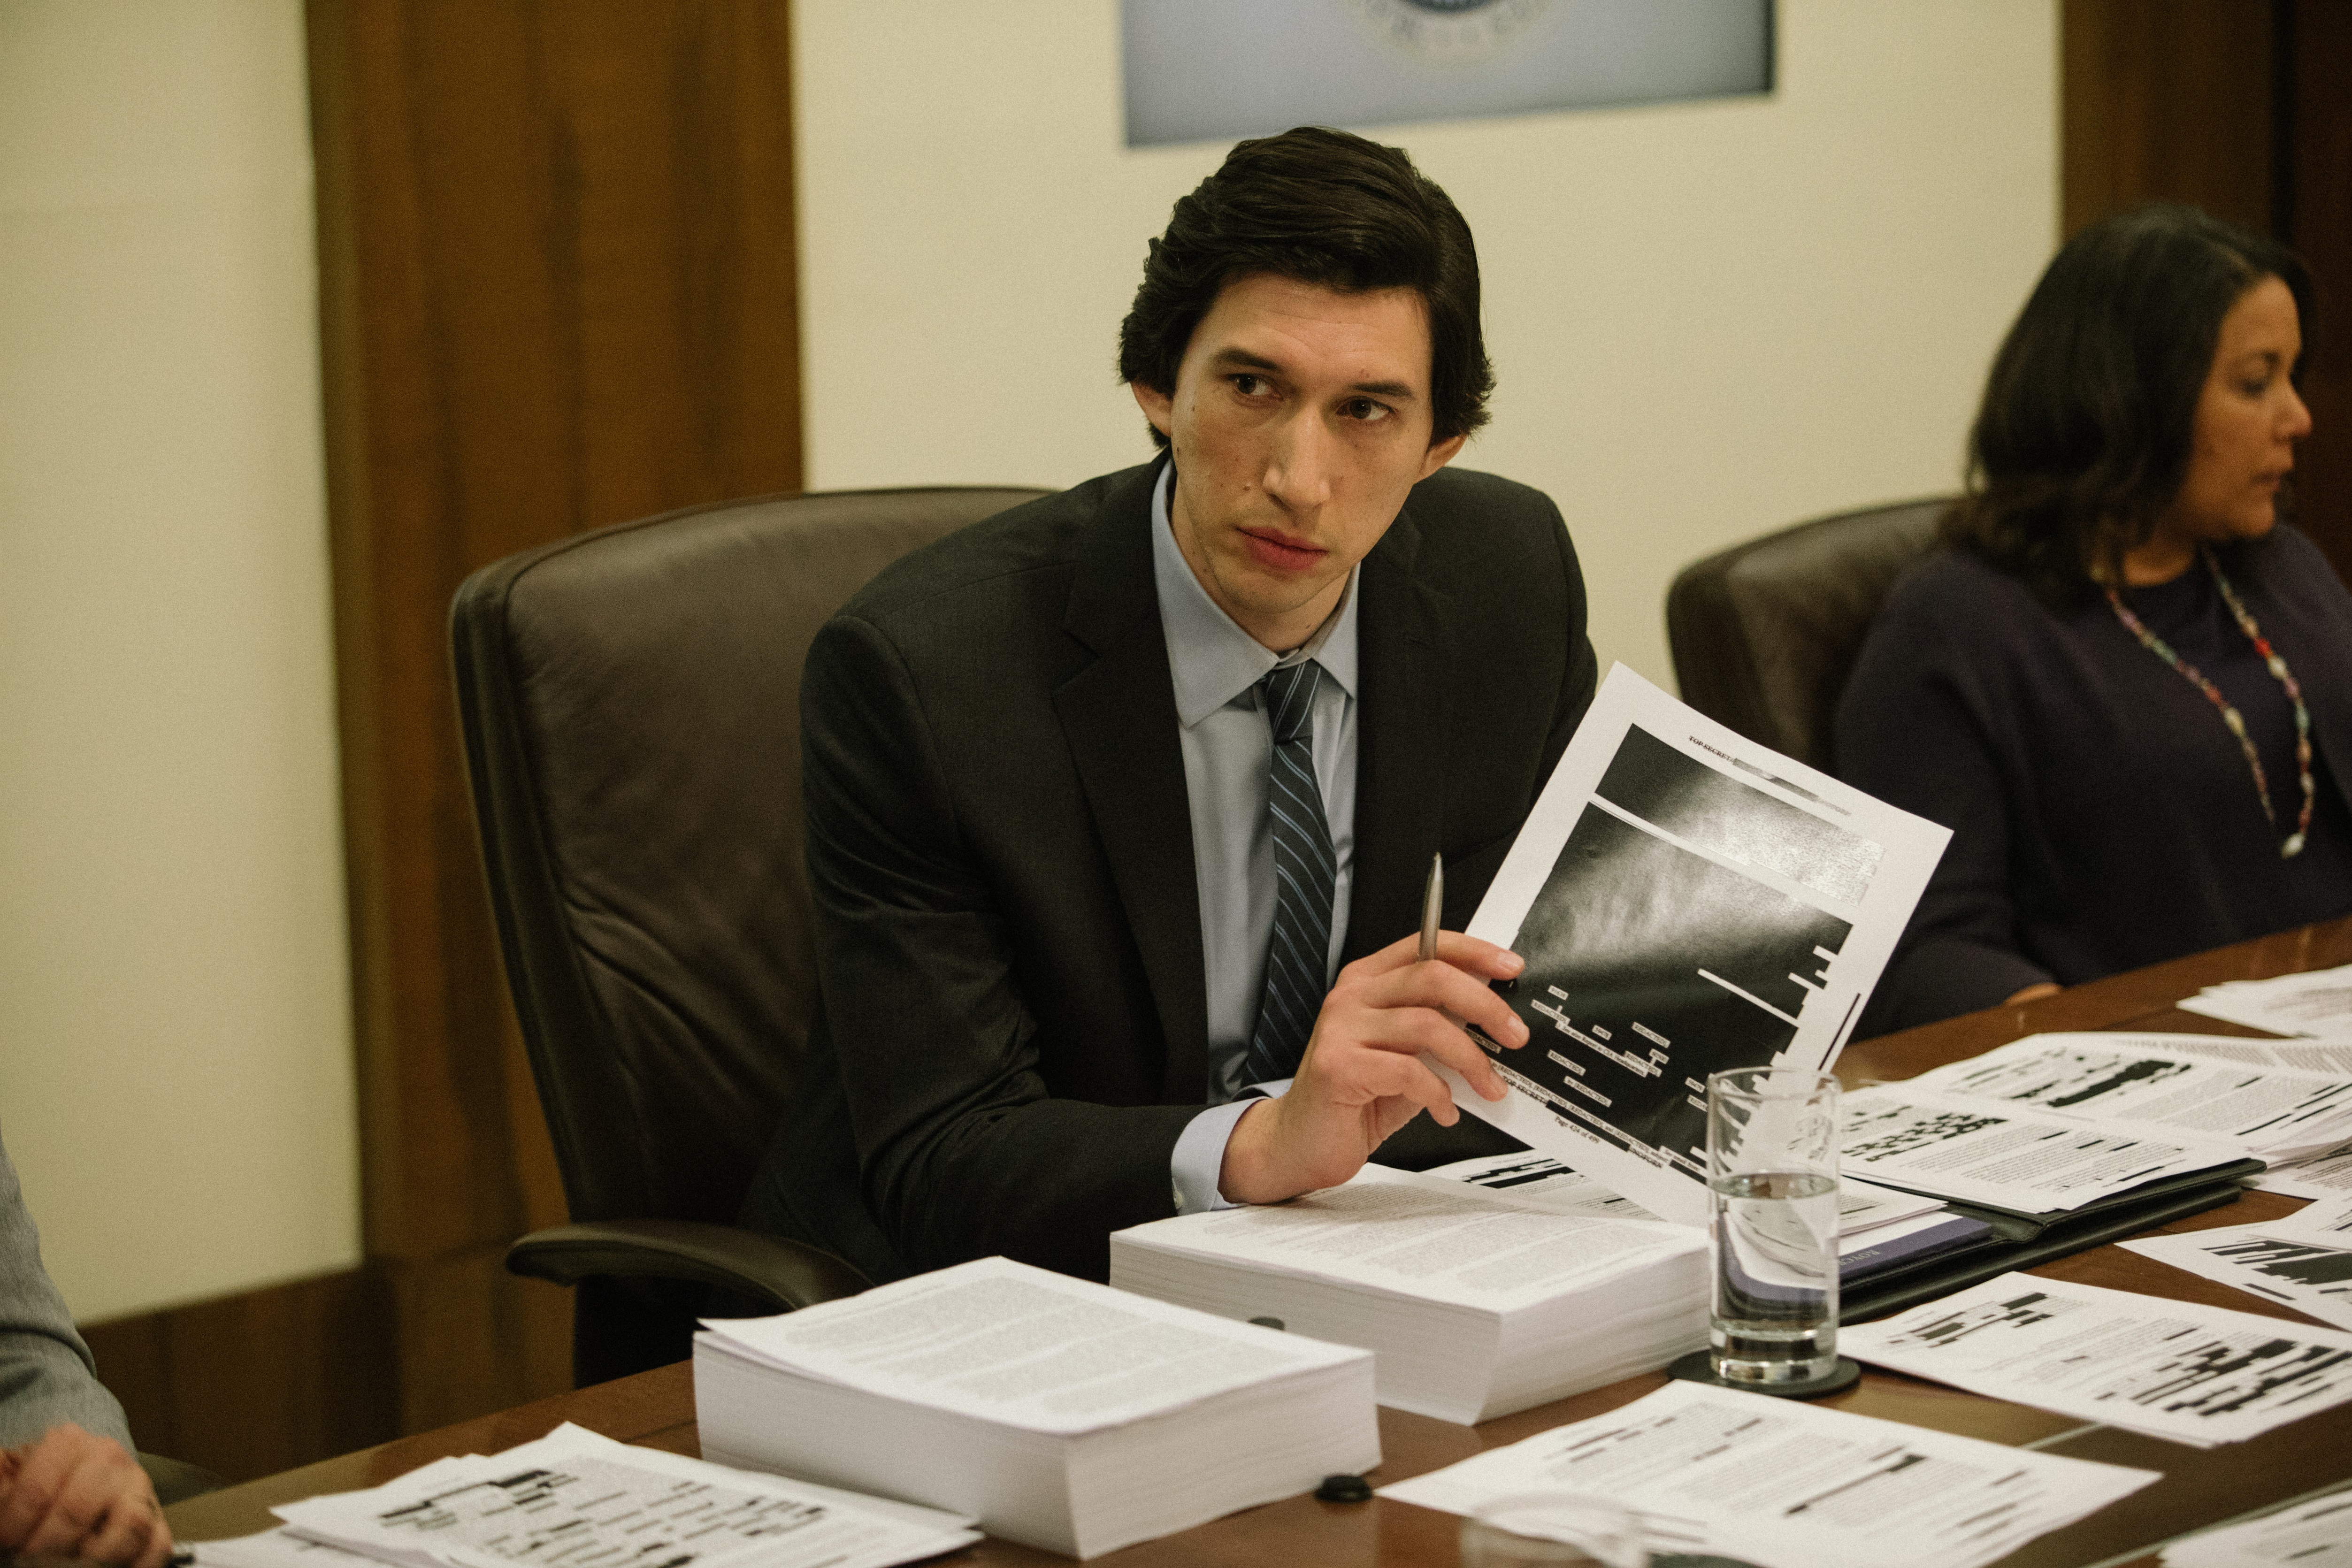 Adam Driver appears in The Report by Scott Z. Burns, an official selection of the Premieres program at the 2019 Sundance Film Festival.